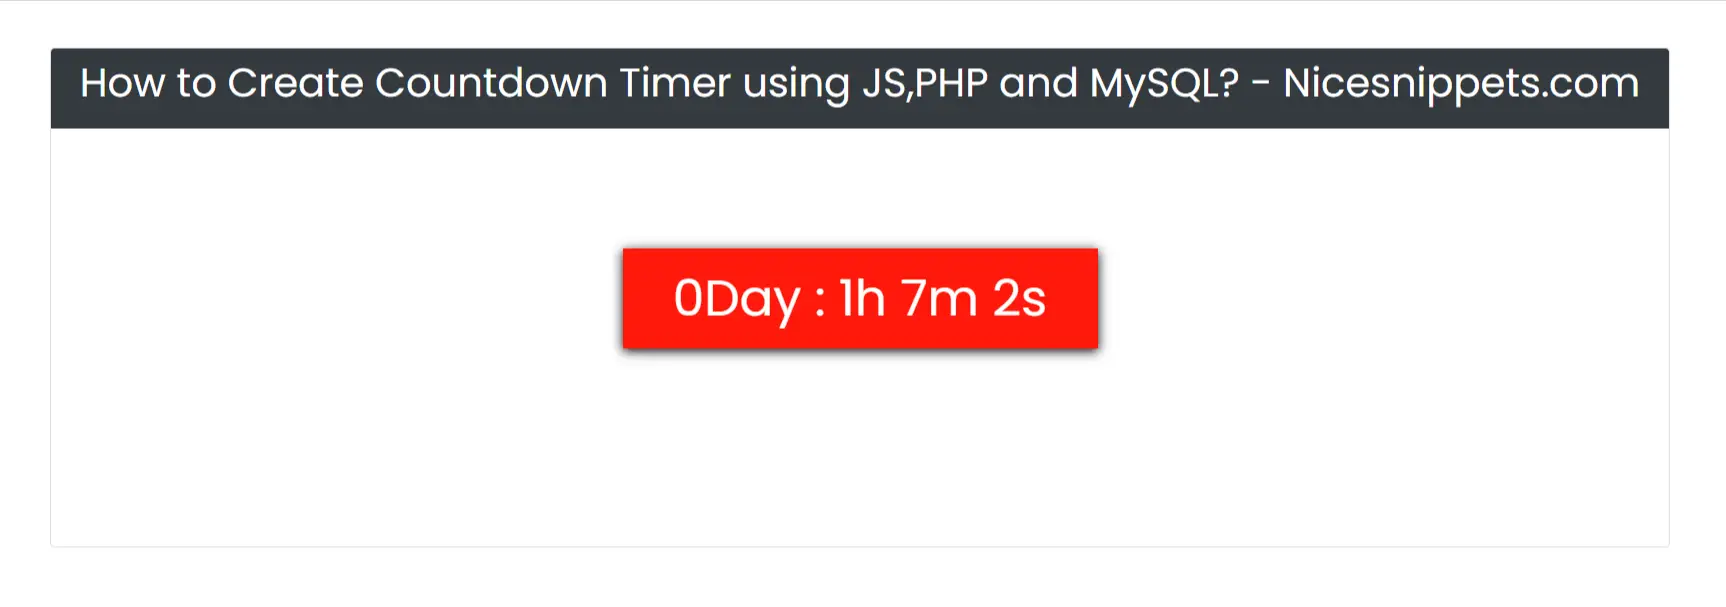 Para buscar refugio escena He reconocido How to Create Countdown Timer using JS,PHP and MySQL?